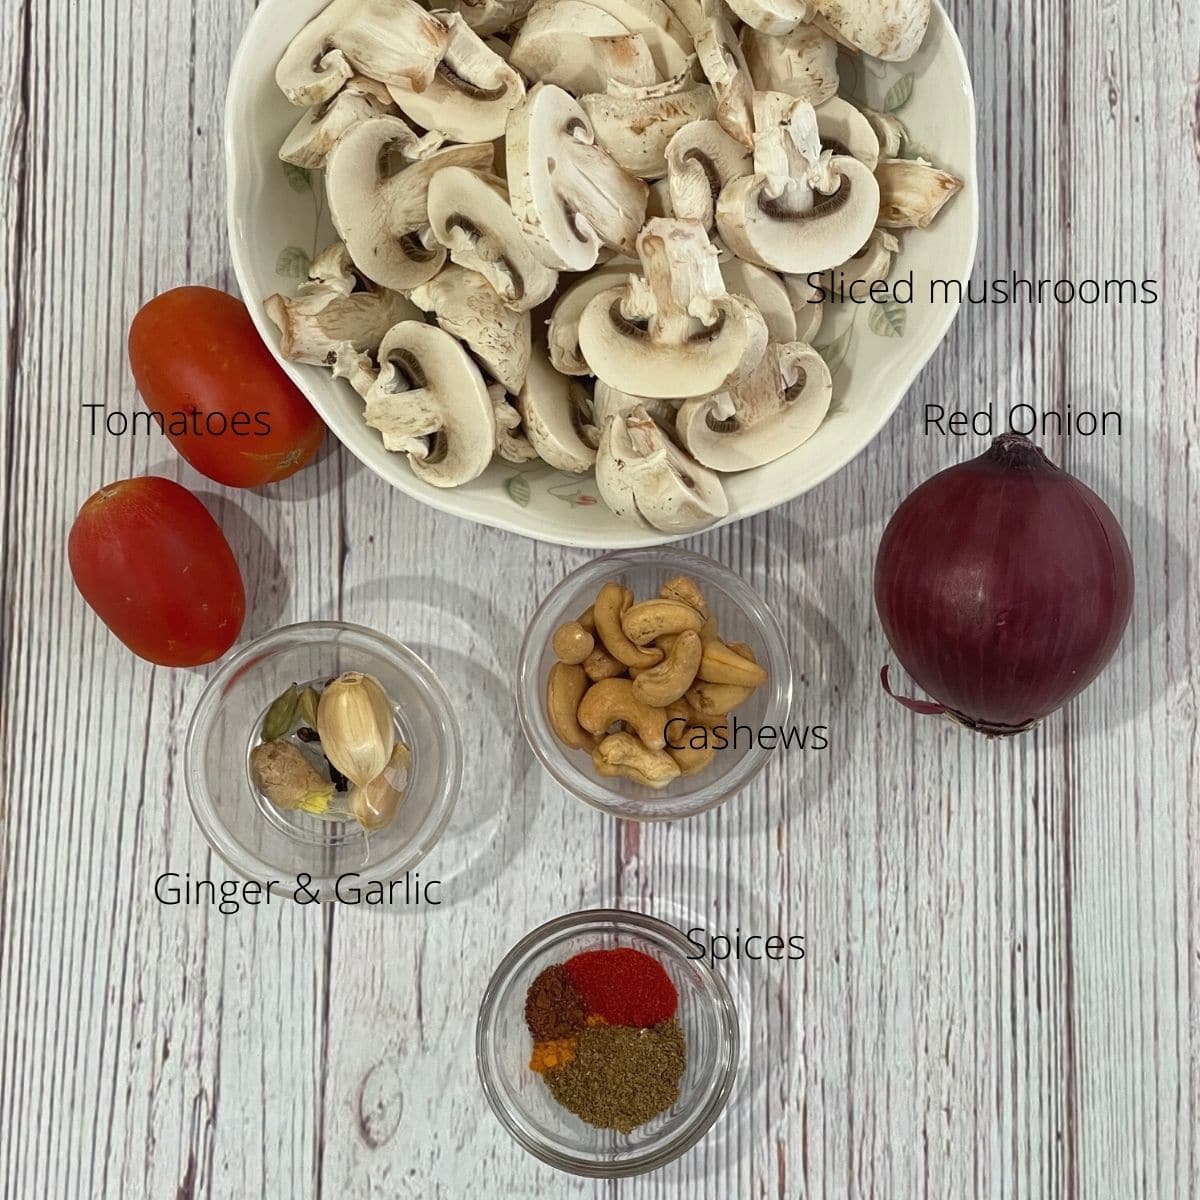 Ingredients for mushroom masala is on the table like onion, tomato, mushrooms and spices.